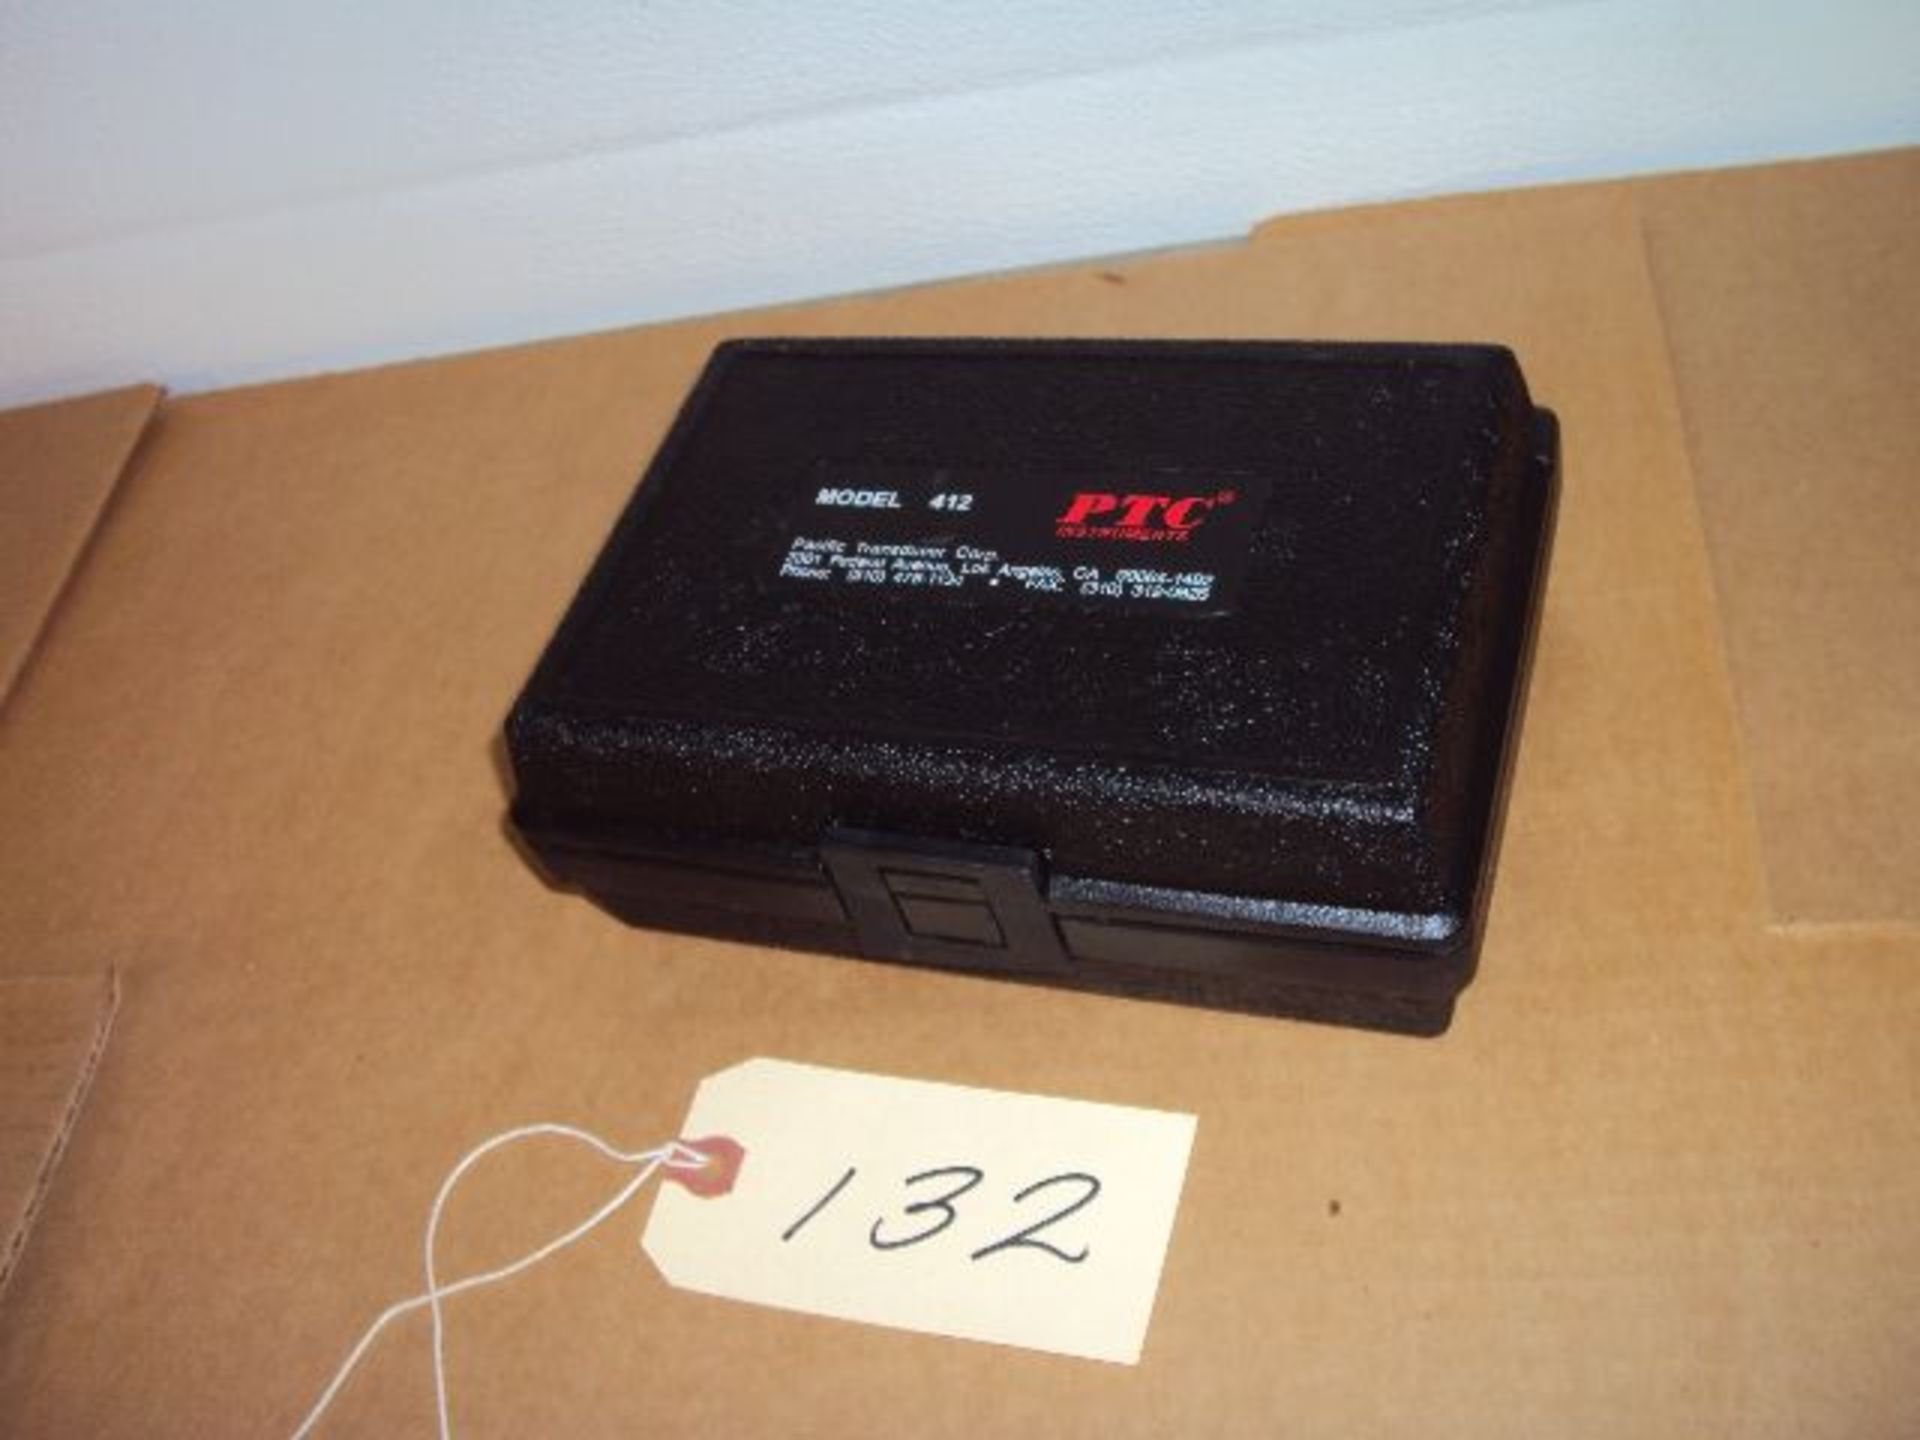 PTC Model 412 Tyoe 000 Durometer Hardness Tester with Test Standard in Padded Case - Image 5 of 5